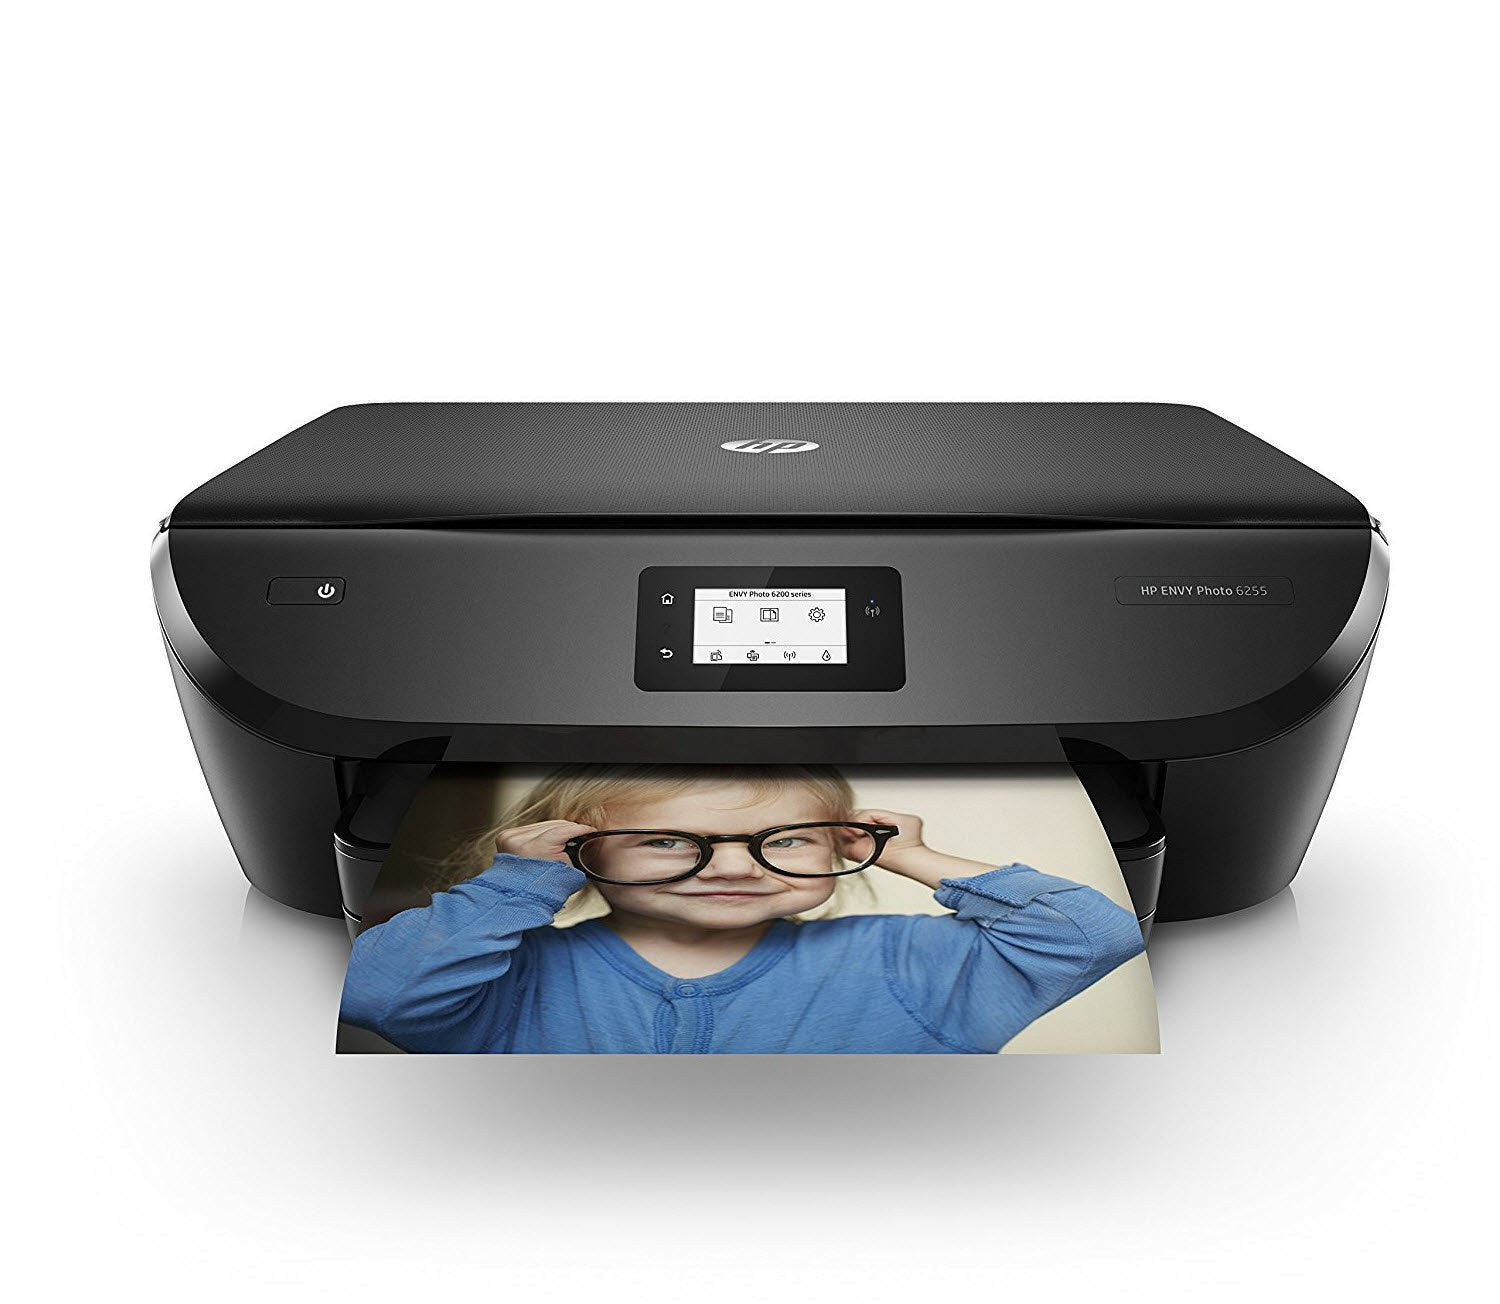 HP ENVY Photo 6255 All in One Photo Printer, 2 Snapshots, and Instant Ink